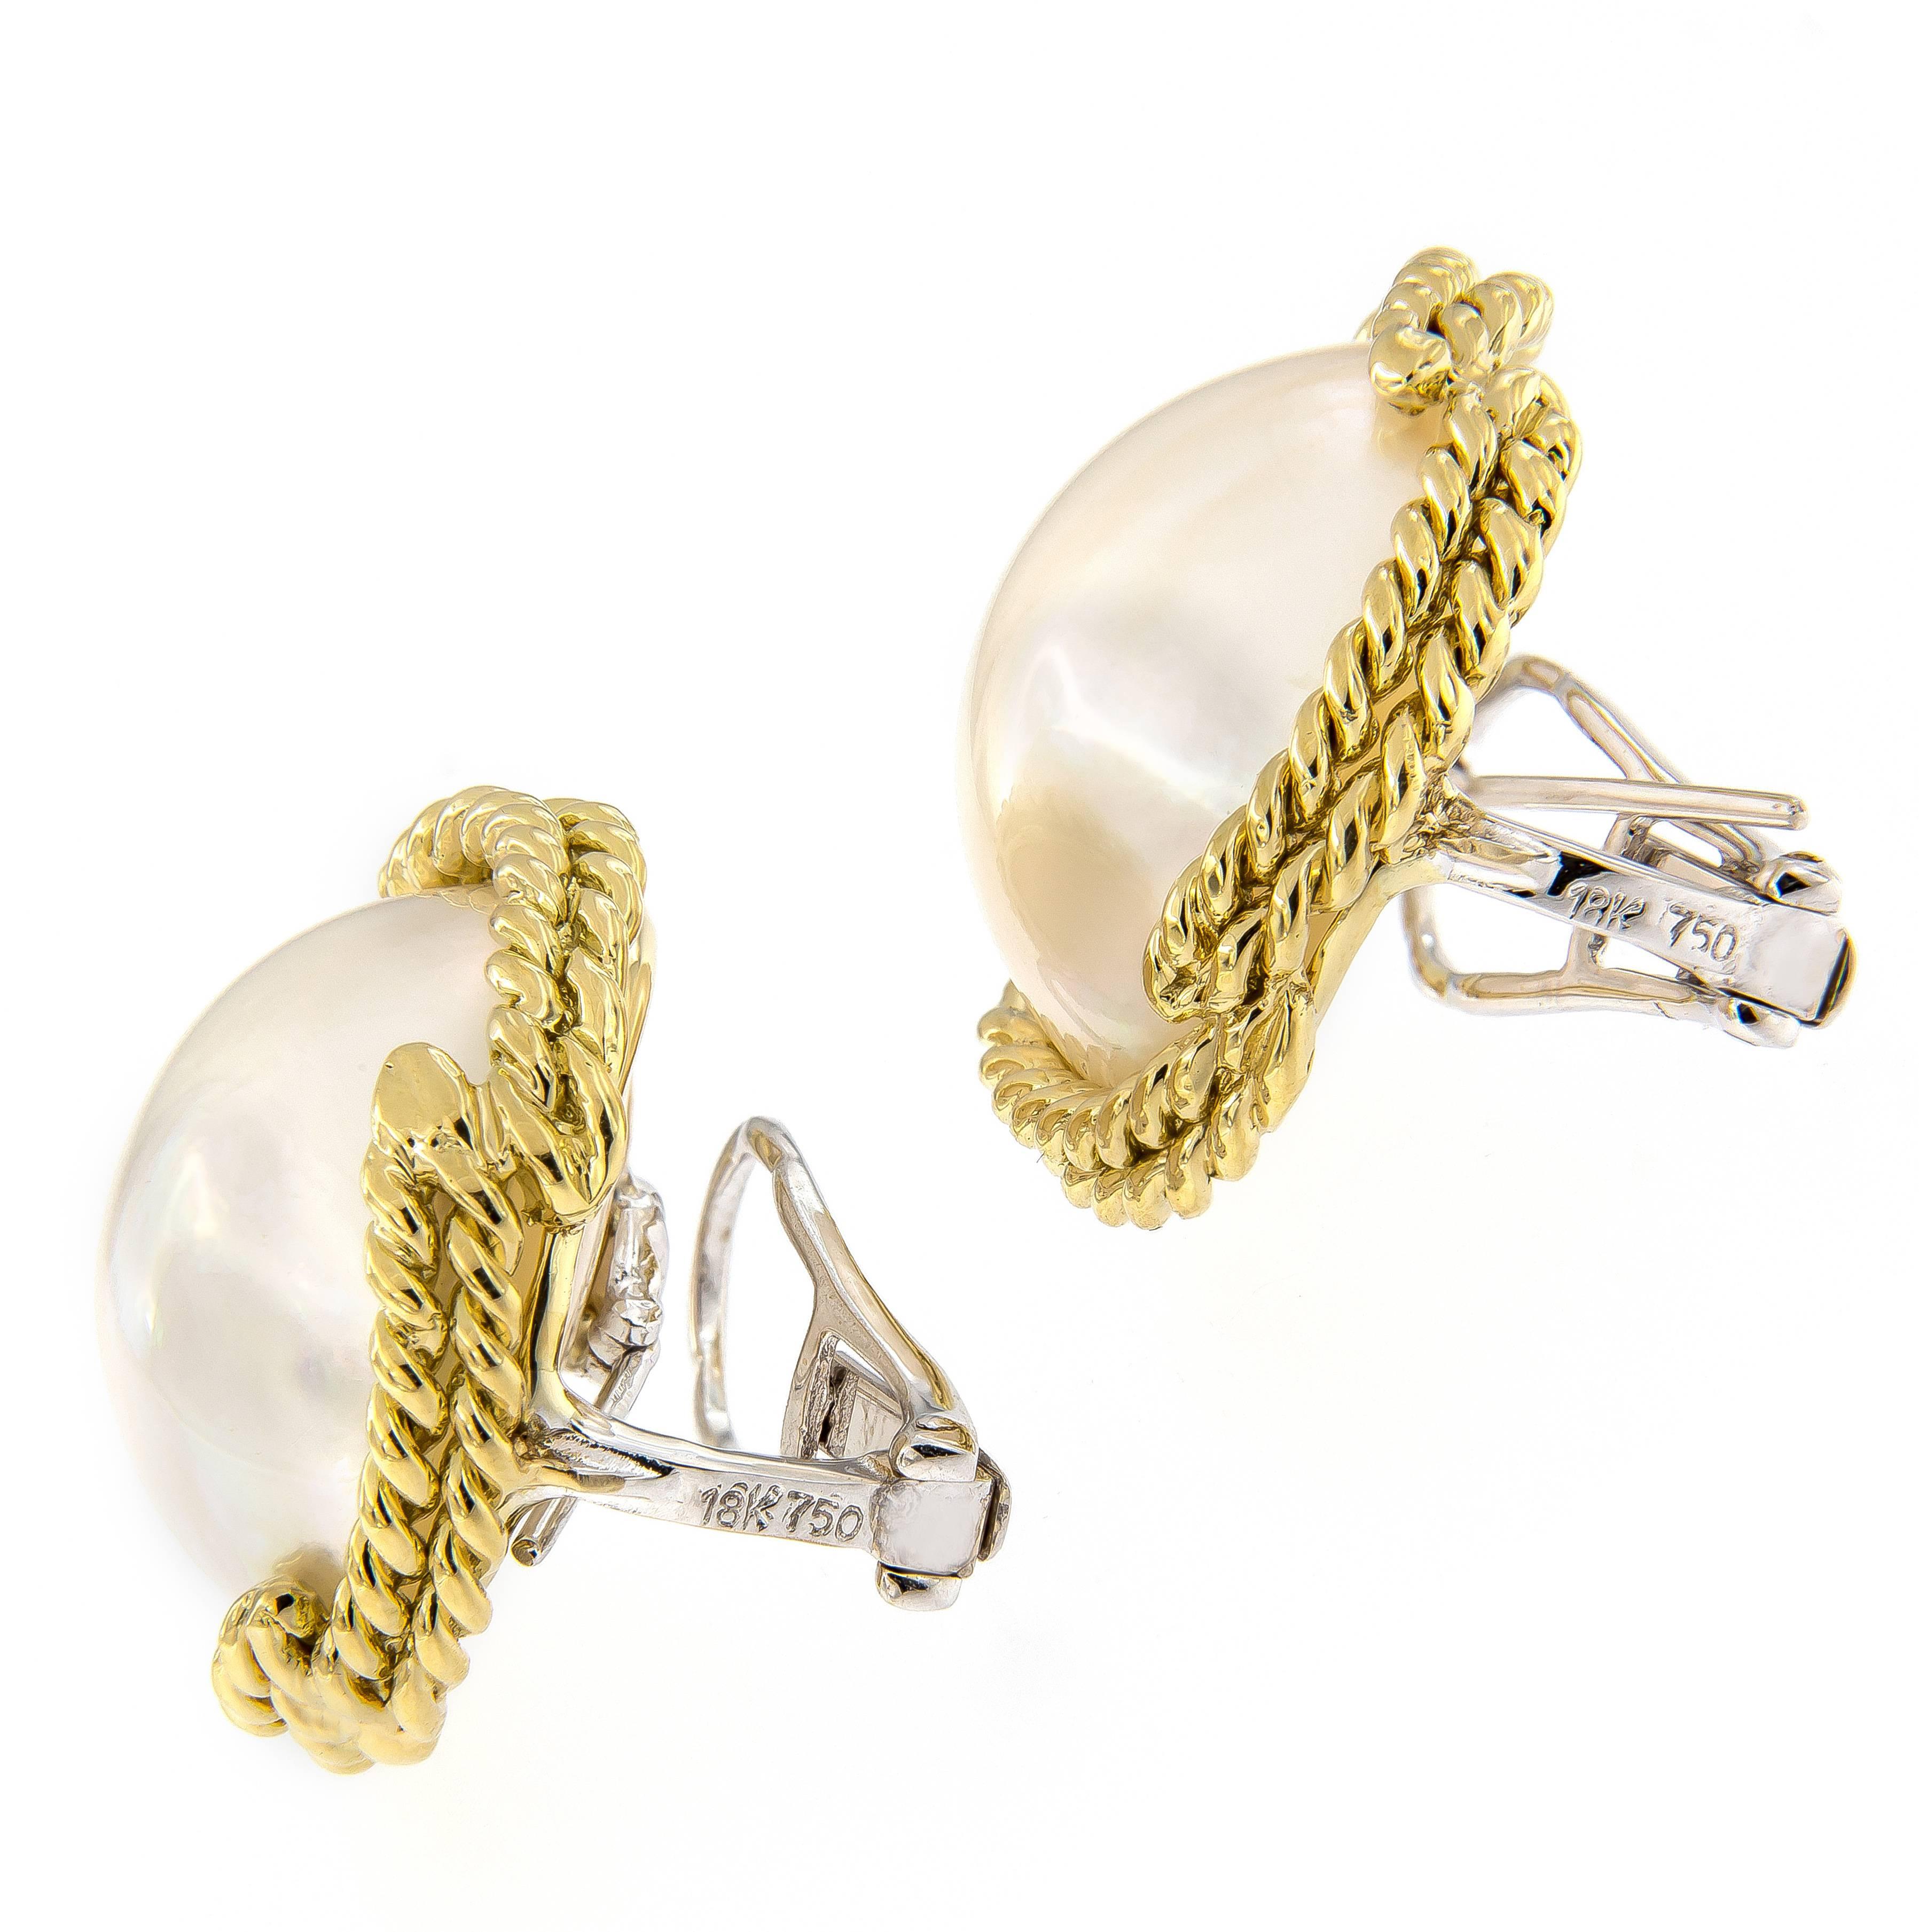 Mabe Pearl clip earrings with a double twisted rope design of 18k yellow gold.
Weigh 22.3 grams. Diameter 25 mm .